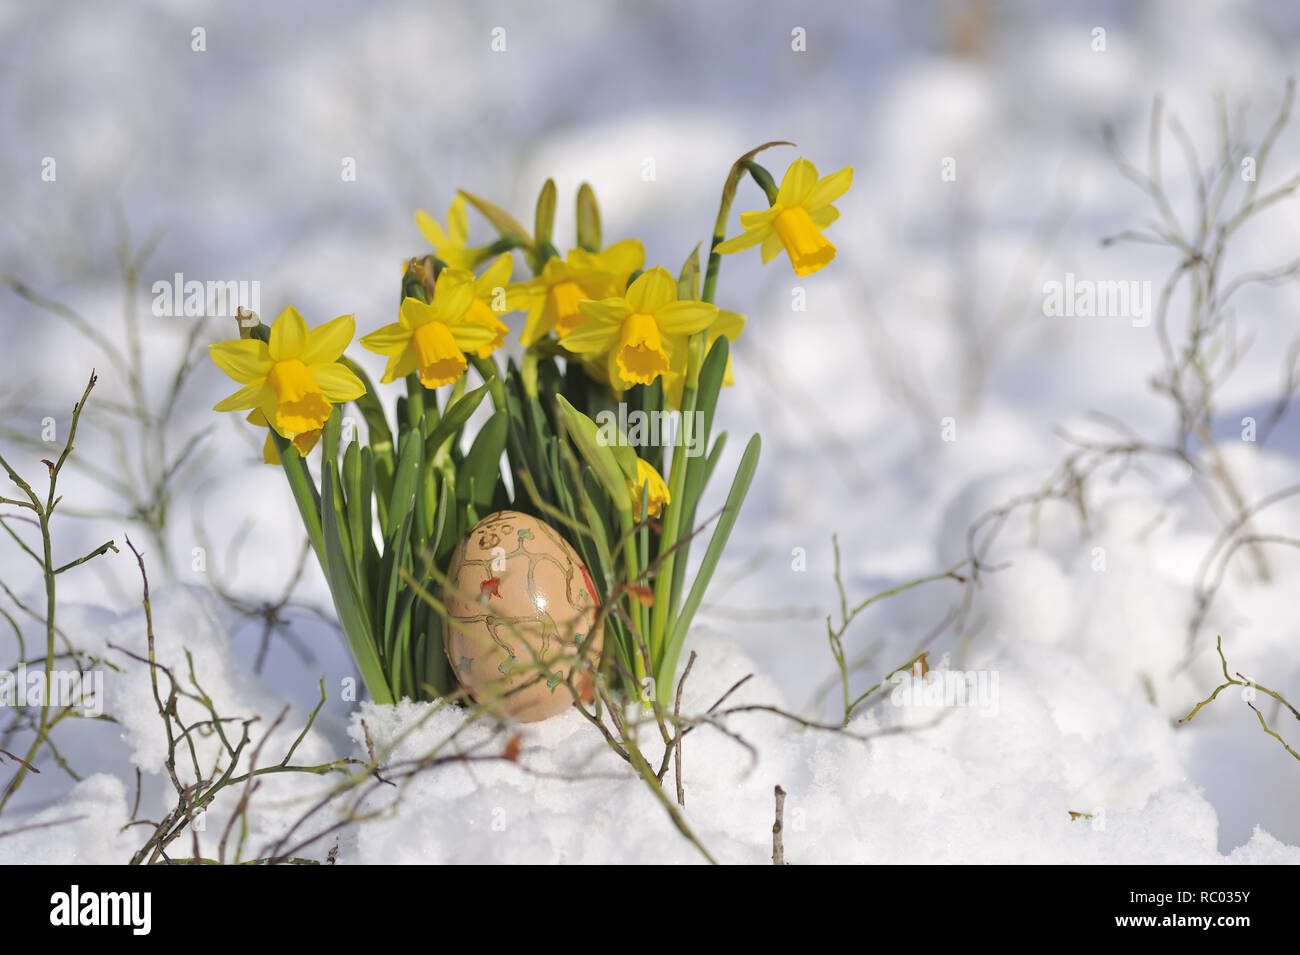 Osterglocken im Schnee mit einem Osterei | Daffodils in snow with an easter egg, Lent lily Stock Photo